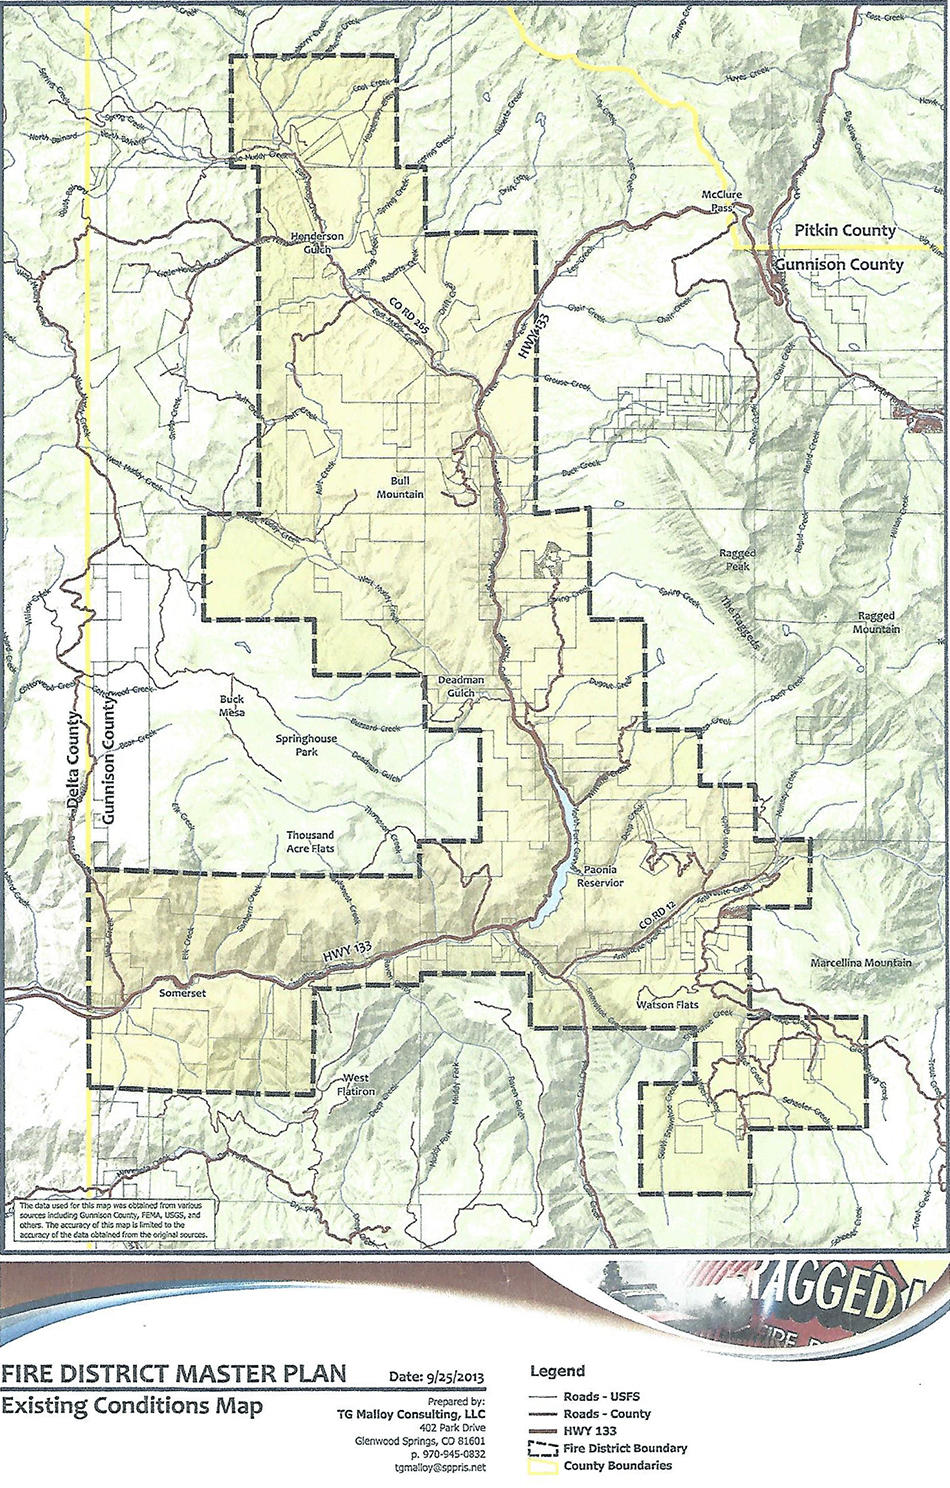 Boundary Map of Fire District